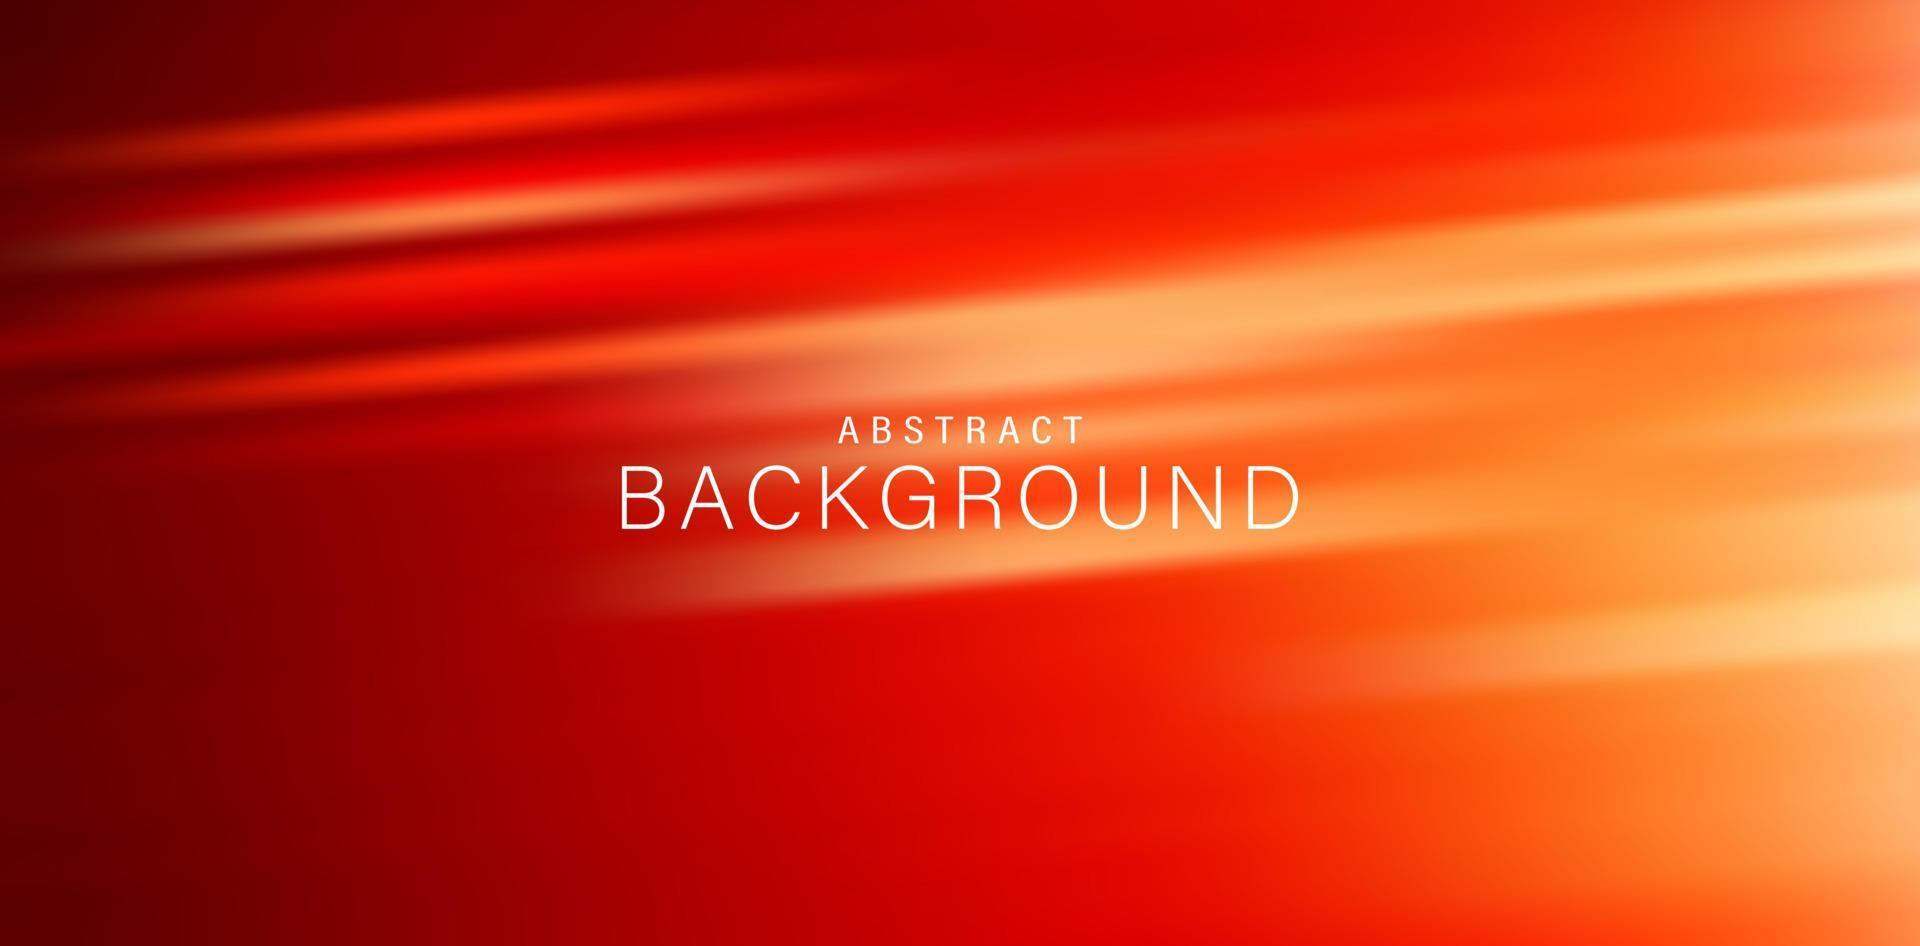 Vector illustration Abstract dark red backgrounds with blurred lines for ecommerce signs retail shopping, advertisement business agency, ads campaign marketing, backdrops space, landing pages, headers